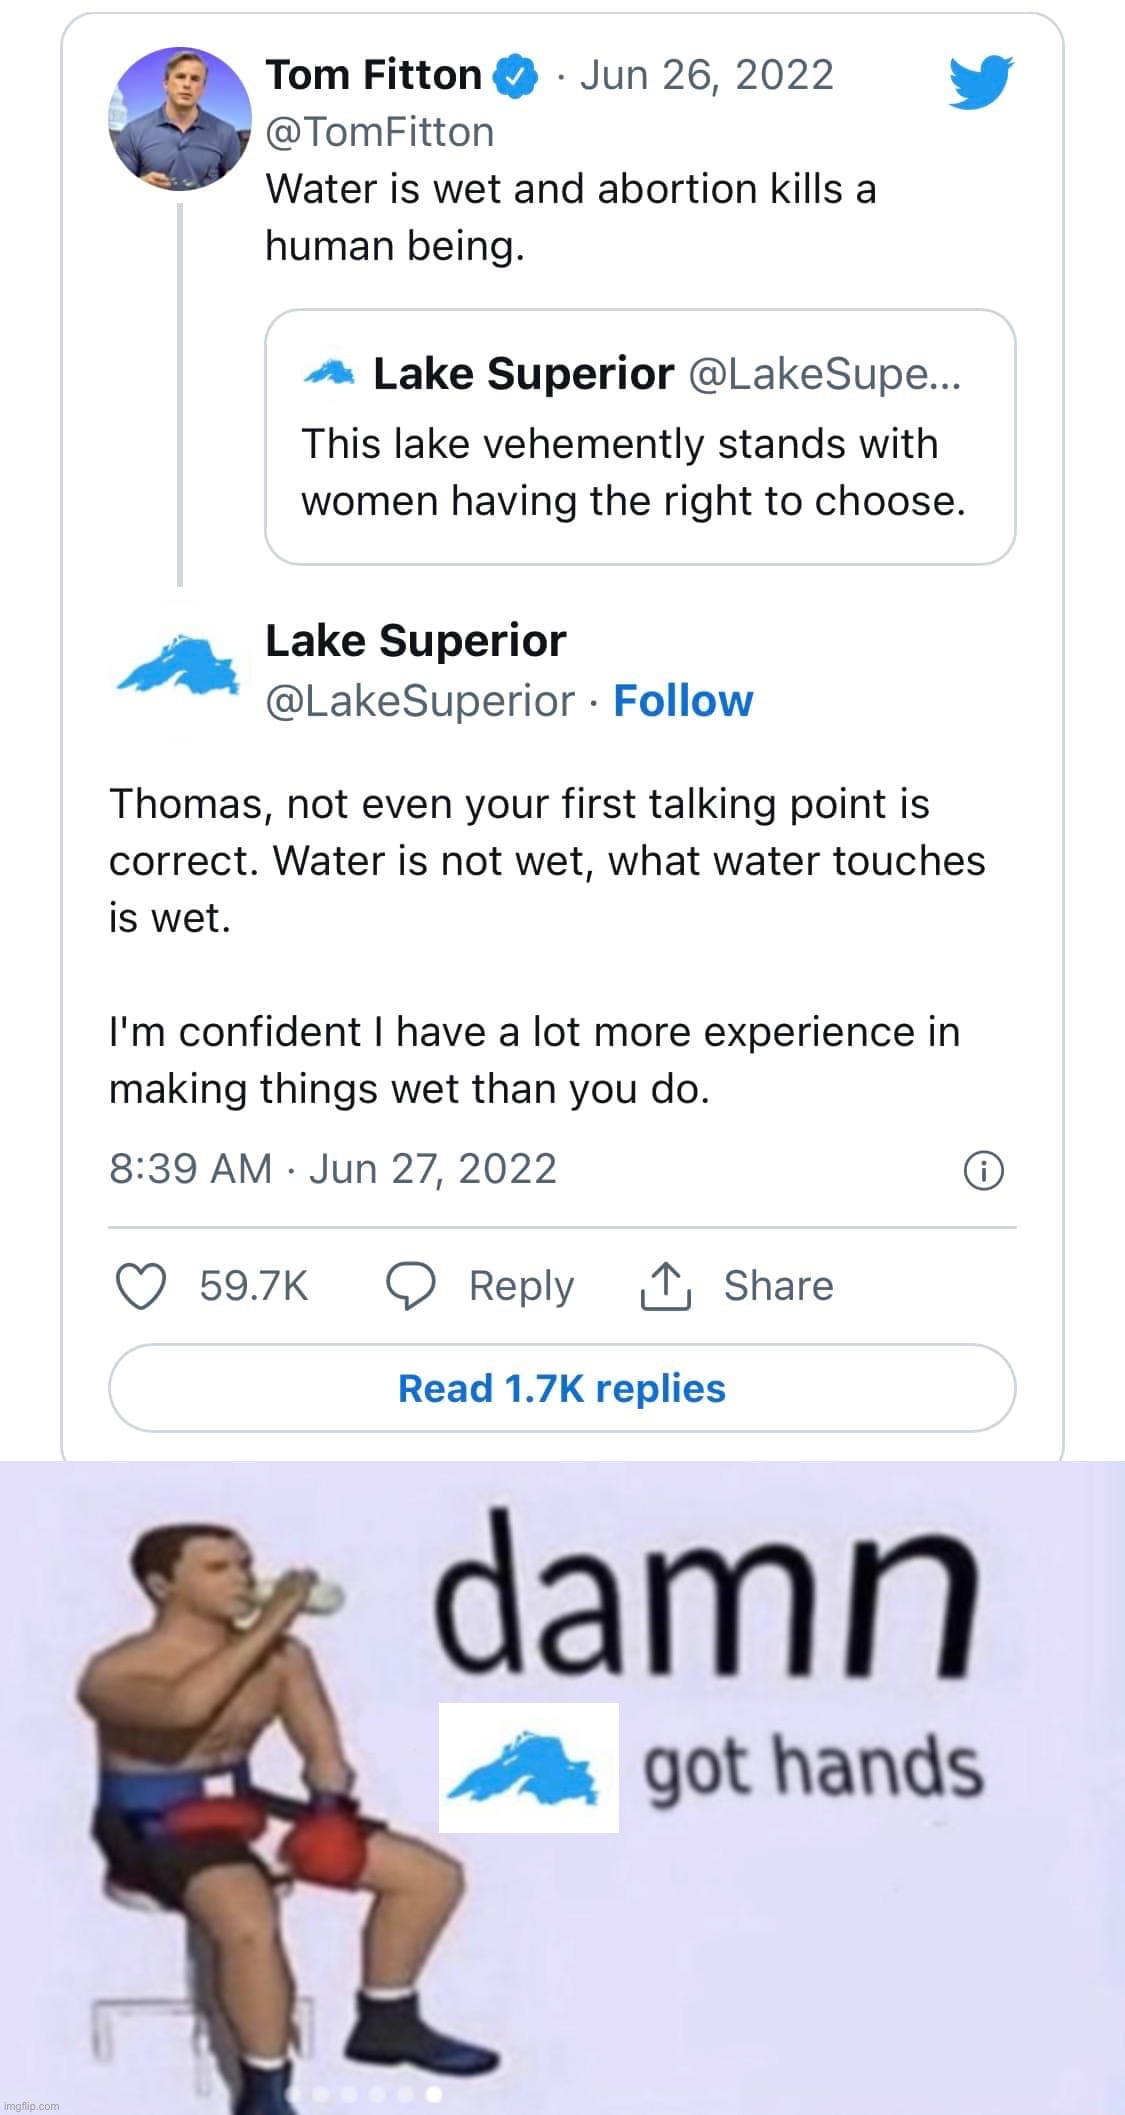 Damn Lake Superior got hands (and yes I know lakes don’t have hands, that was a metaphor, duh) | image tagged in lake superior vs tom fitton,damn got hands | made w/ Imgflip meme maker